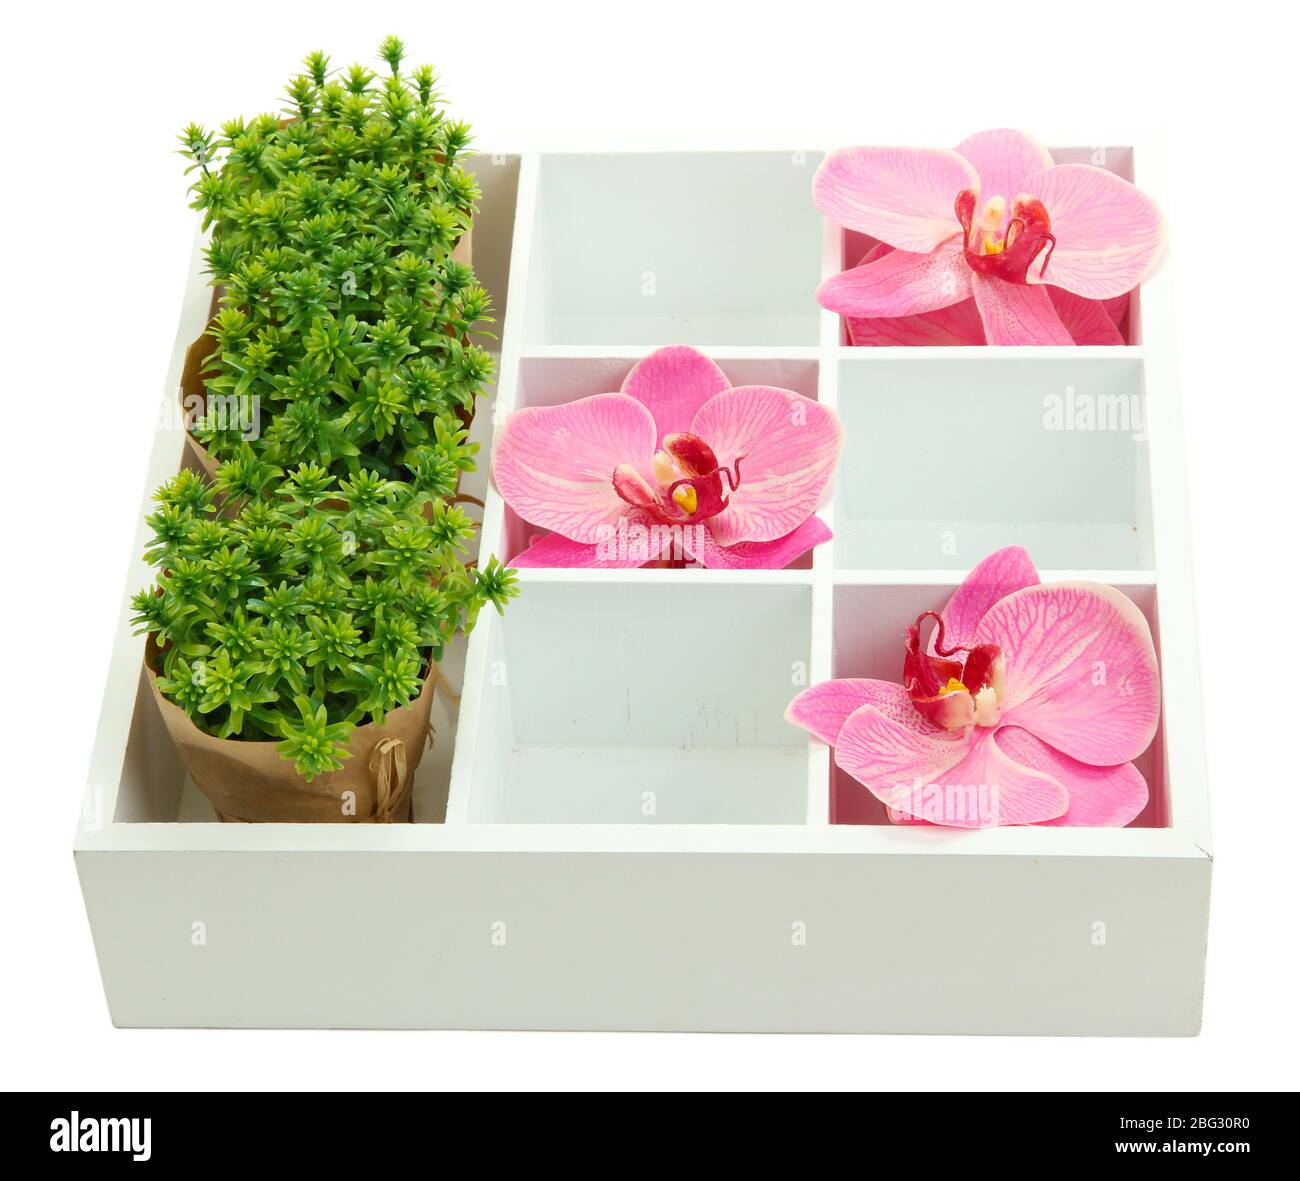 Beautiful flowers arranged in wooden box isolated on white Stock Photo